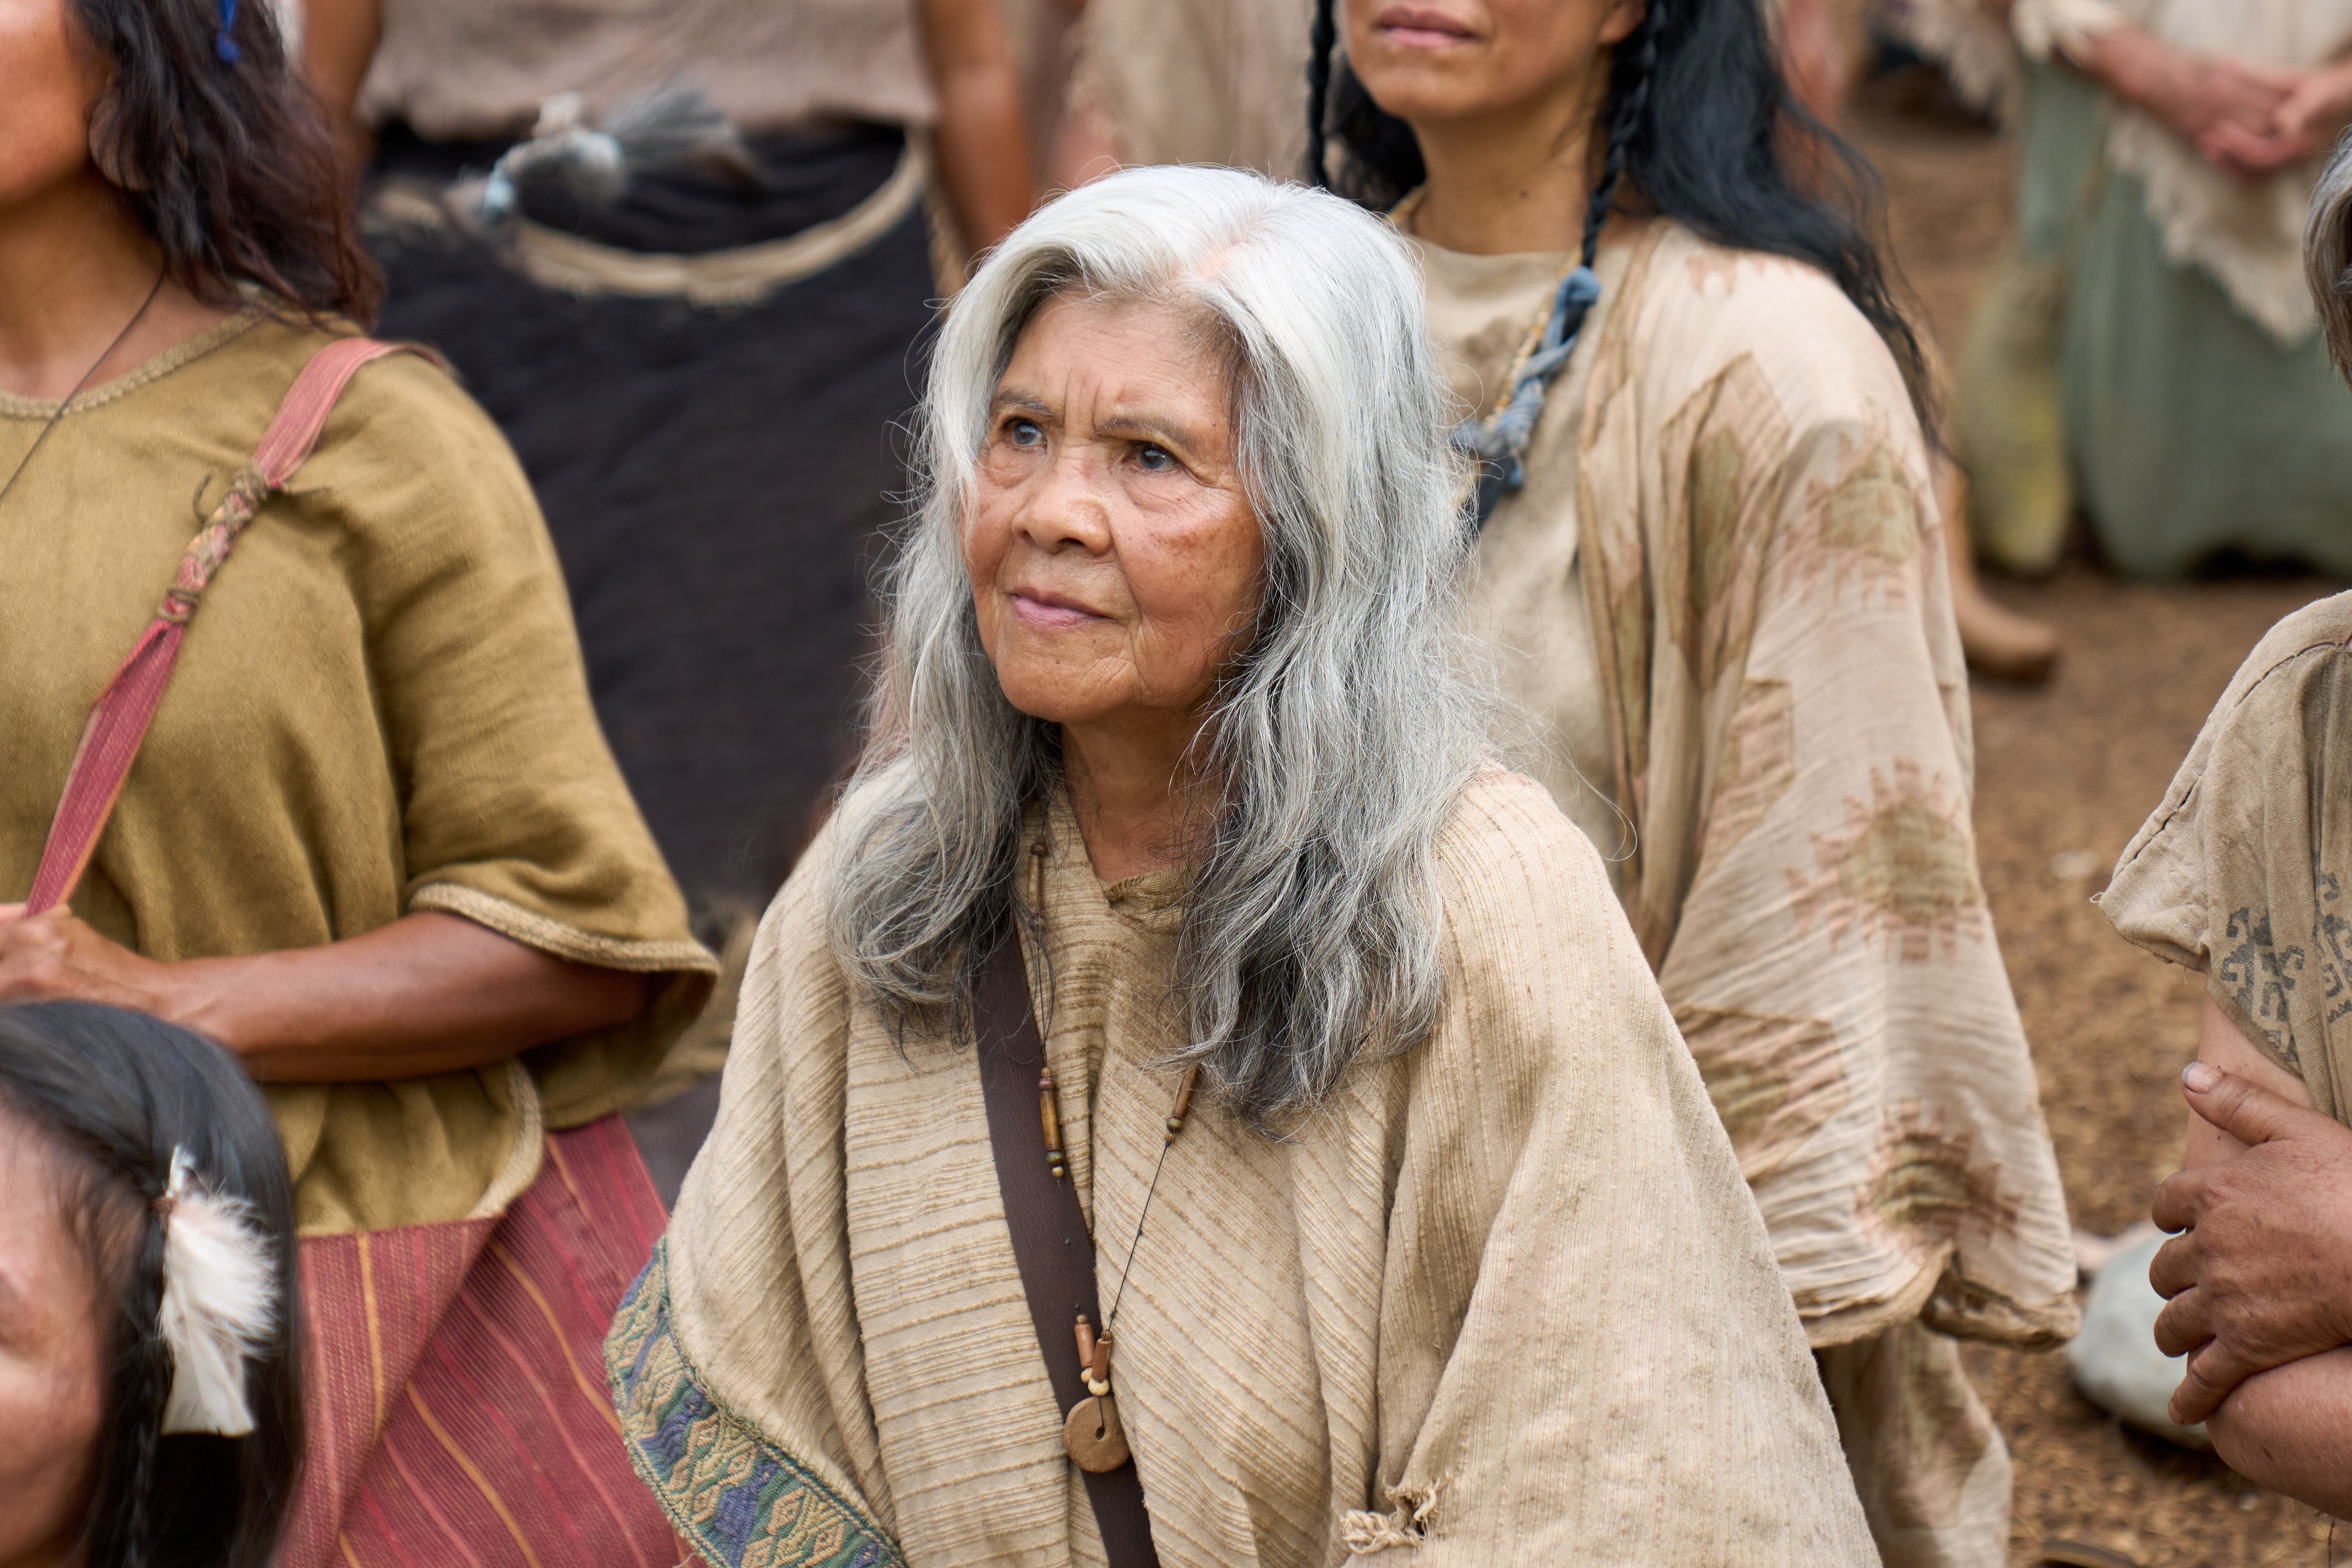 An elderly woman listens to the resurrected Savior, Jesus Christ, as he ministers to the inhabitants of the Americas.